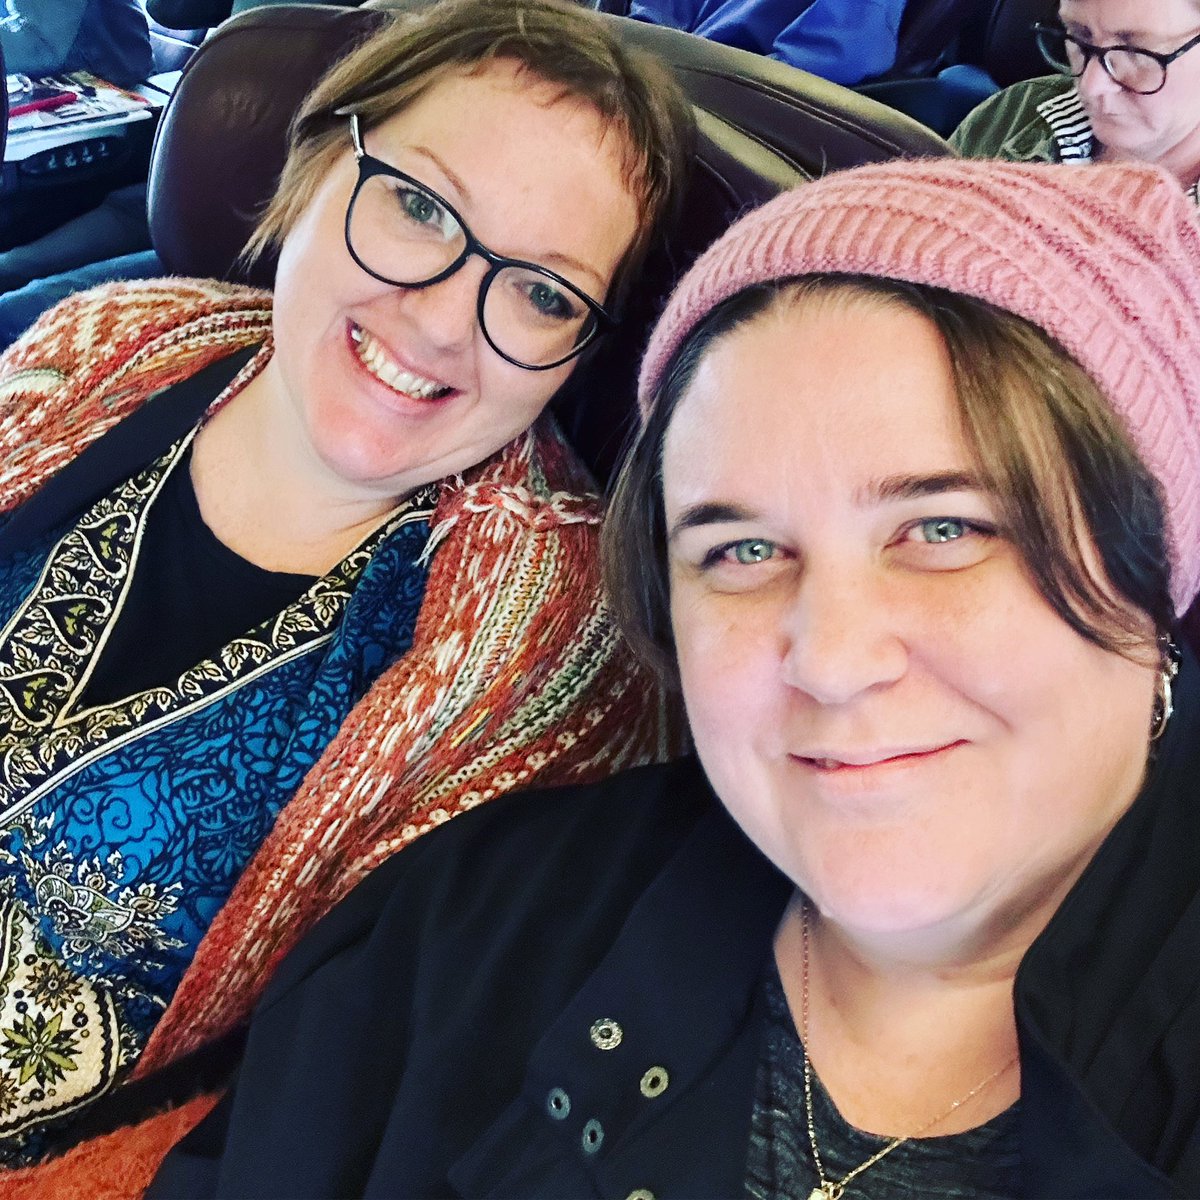 With @elina_raven - #Sydney here we come!!! #Disability #Leadership #Summit